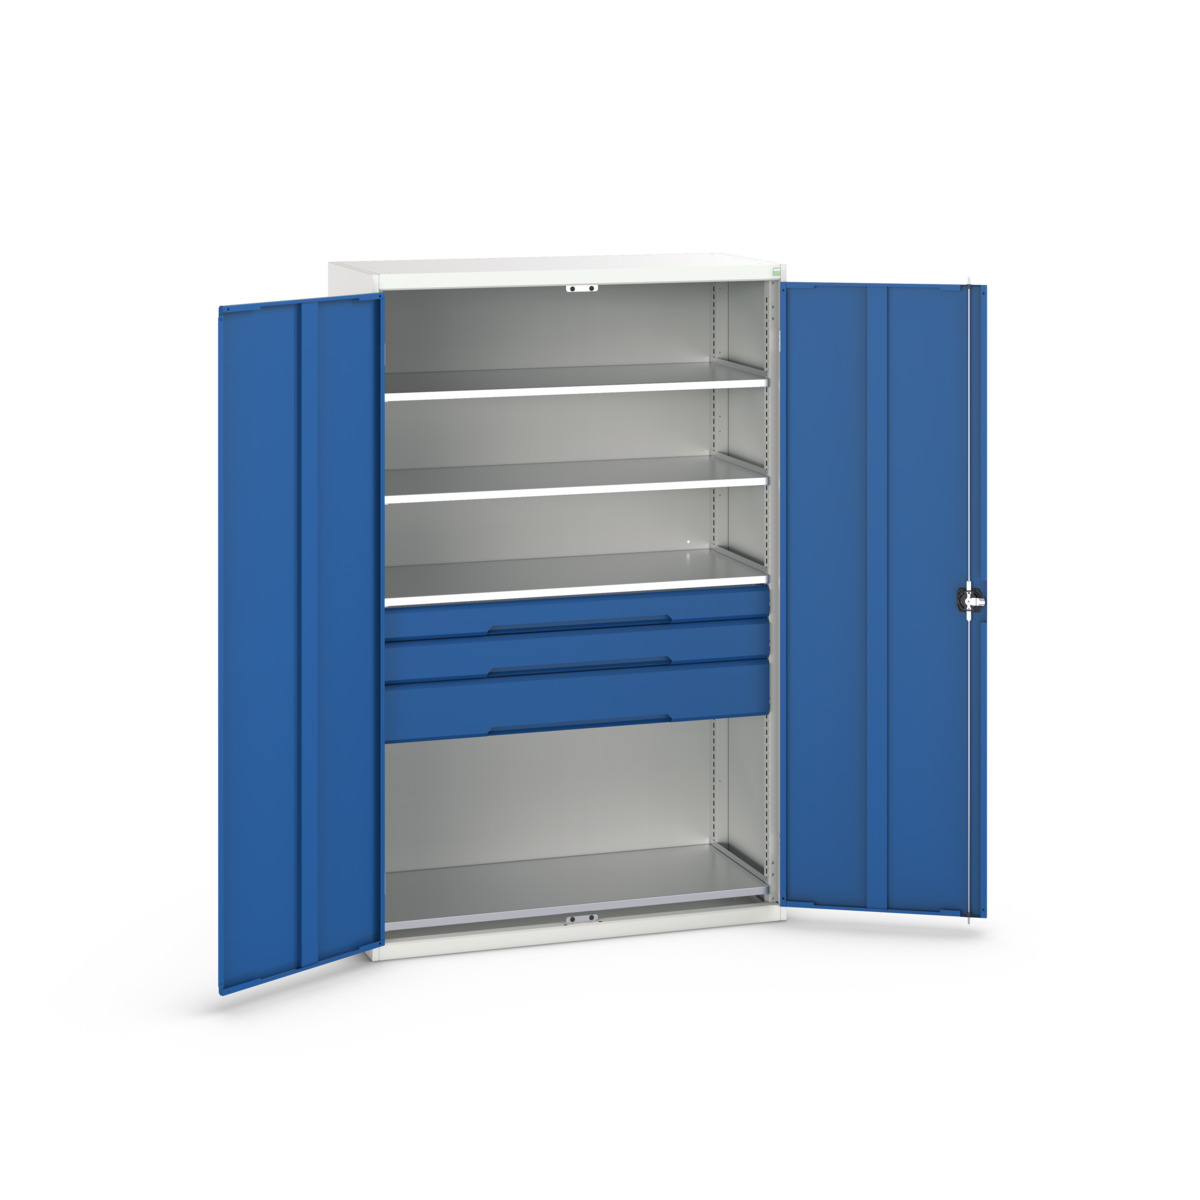 16926655.11 - verso kitted cupboard